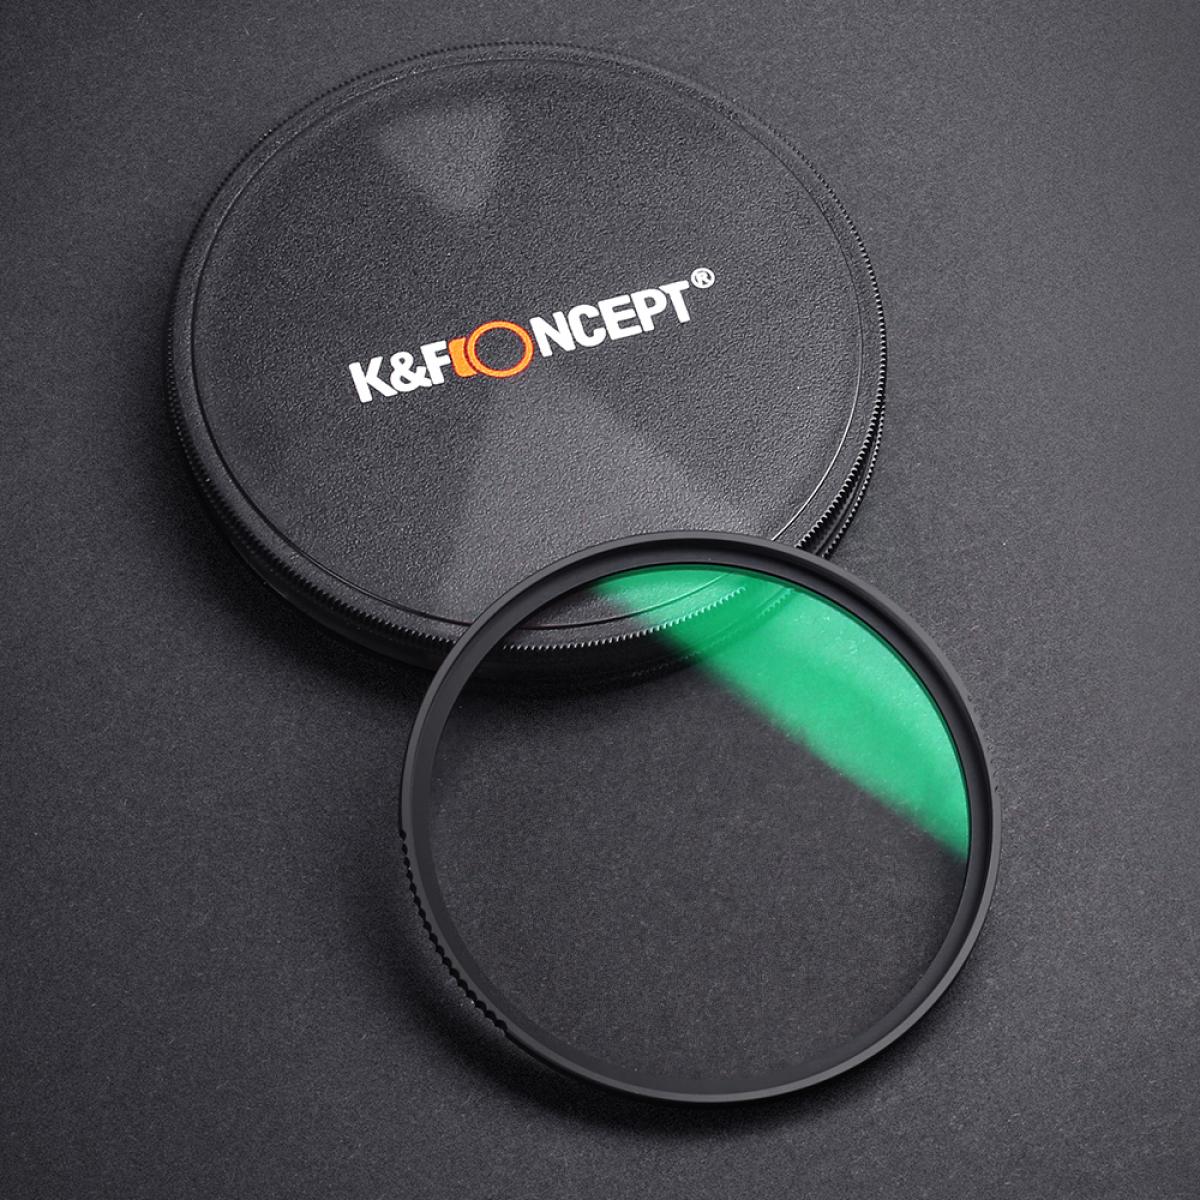 K&F Concept Black Mist Filter 1/8 Special Effects Filter Multi Coated Waterproof Scratch-Resistant Anti-Reflection Nano-X Series